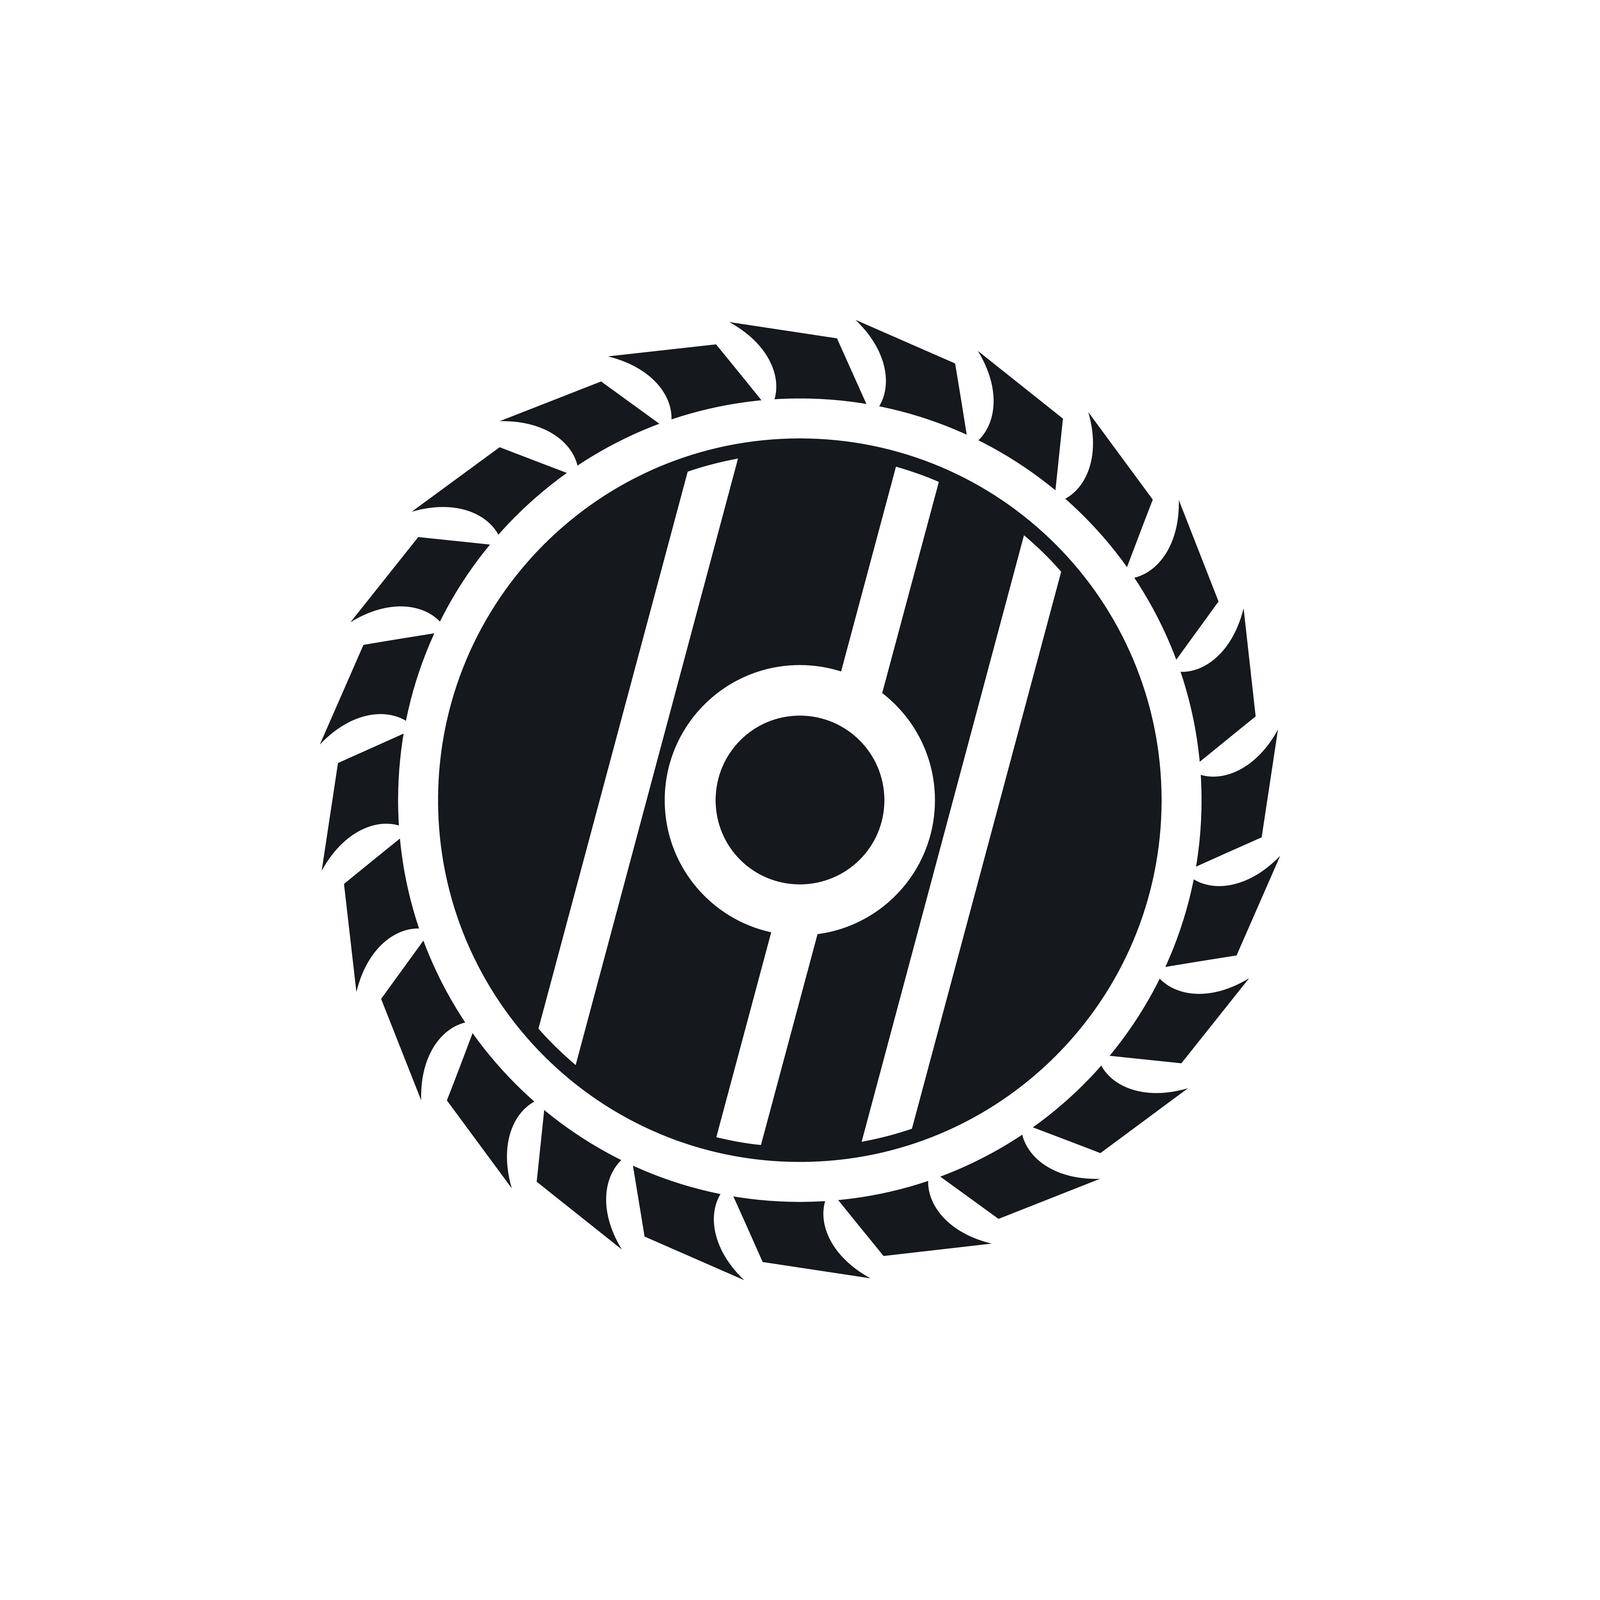 Circular saw blade icon, simple style by ylivdesign